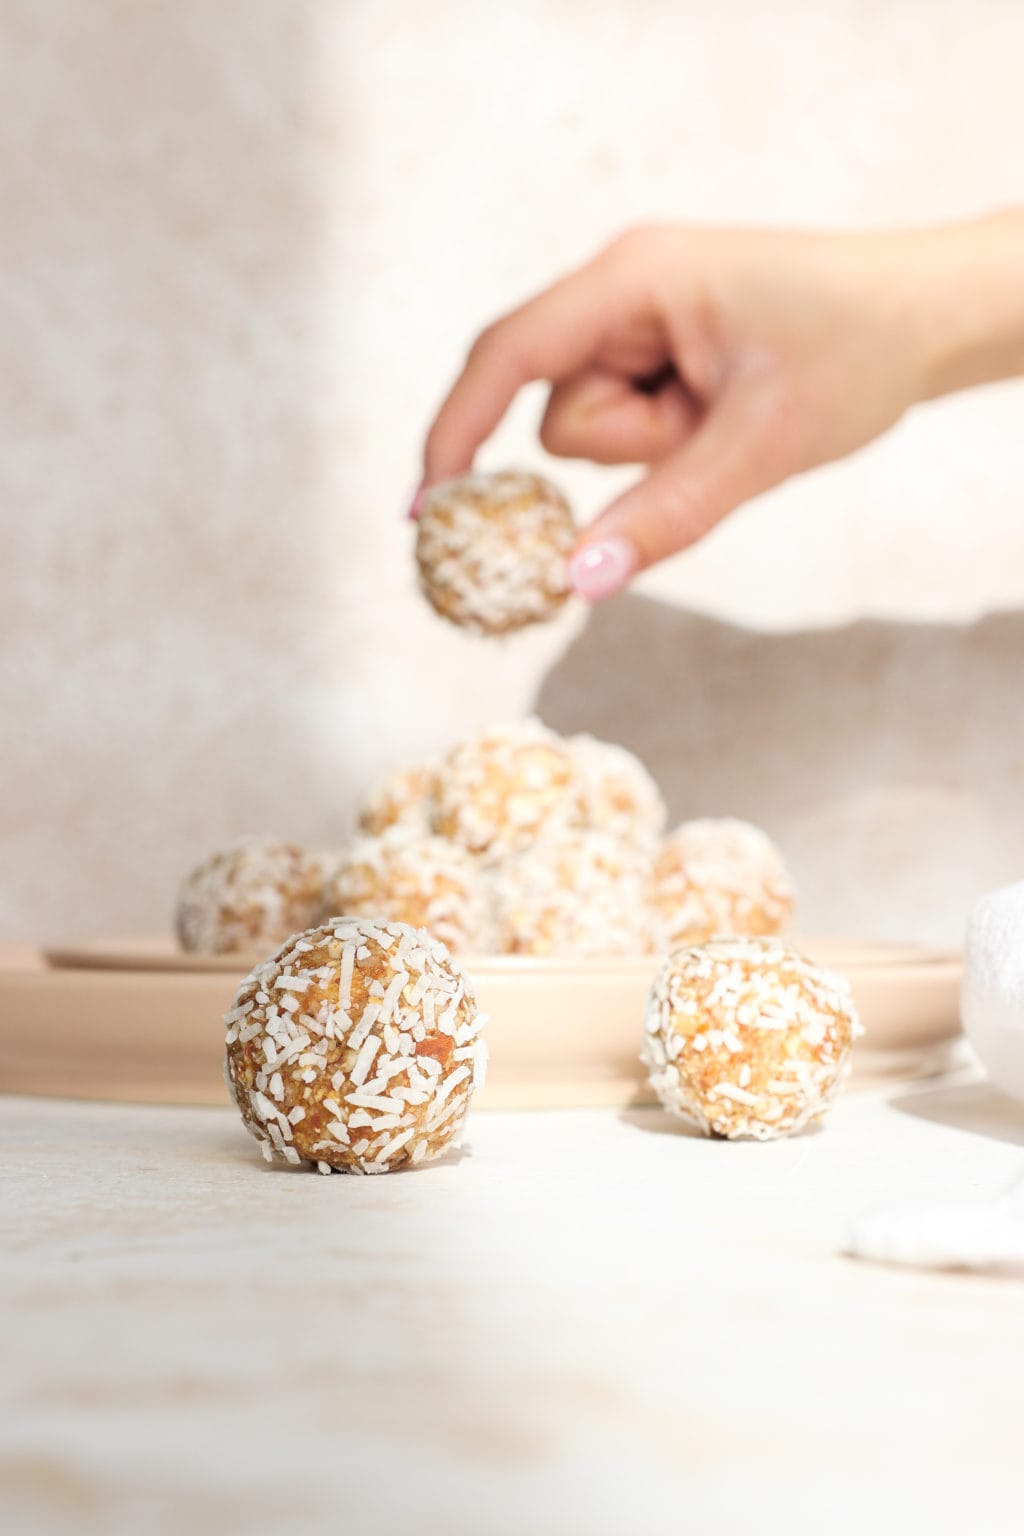 Two energy balls are in the forefront with a hand in the background picking up an energy ball from a plate.